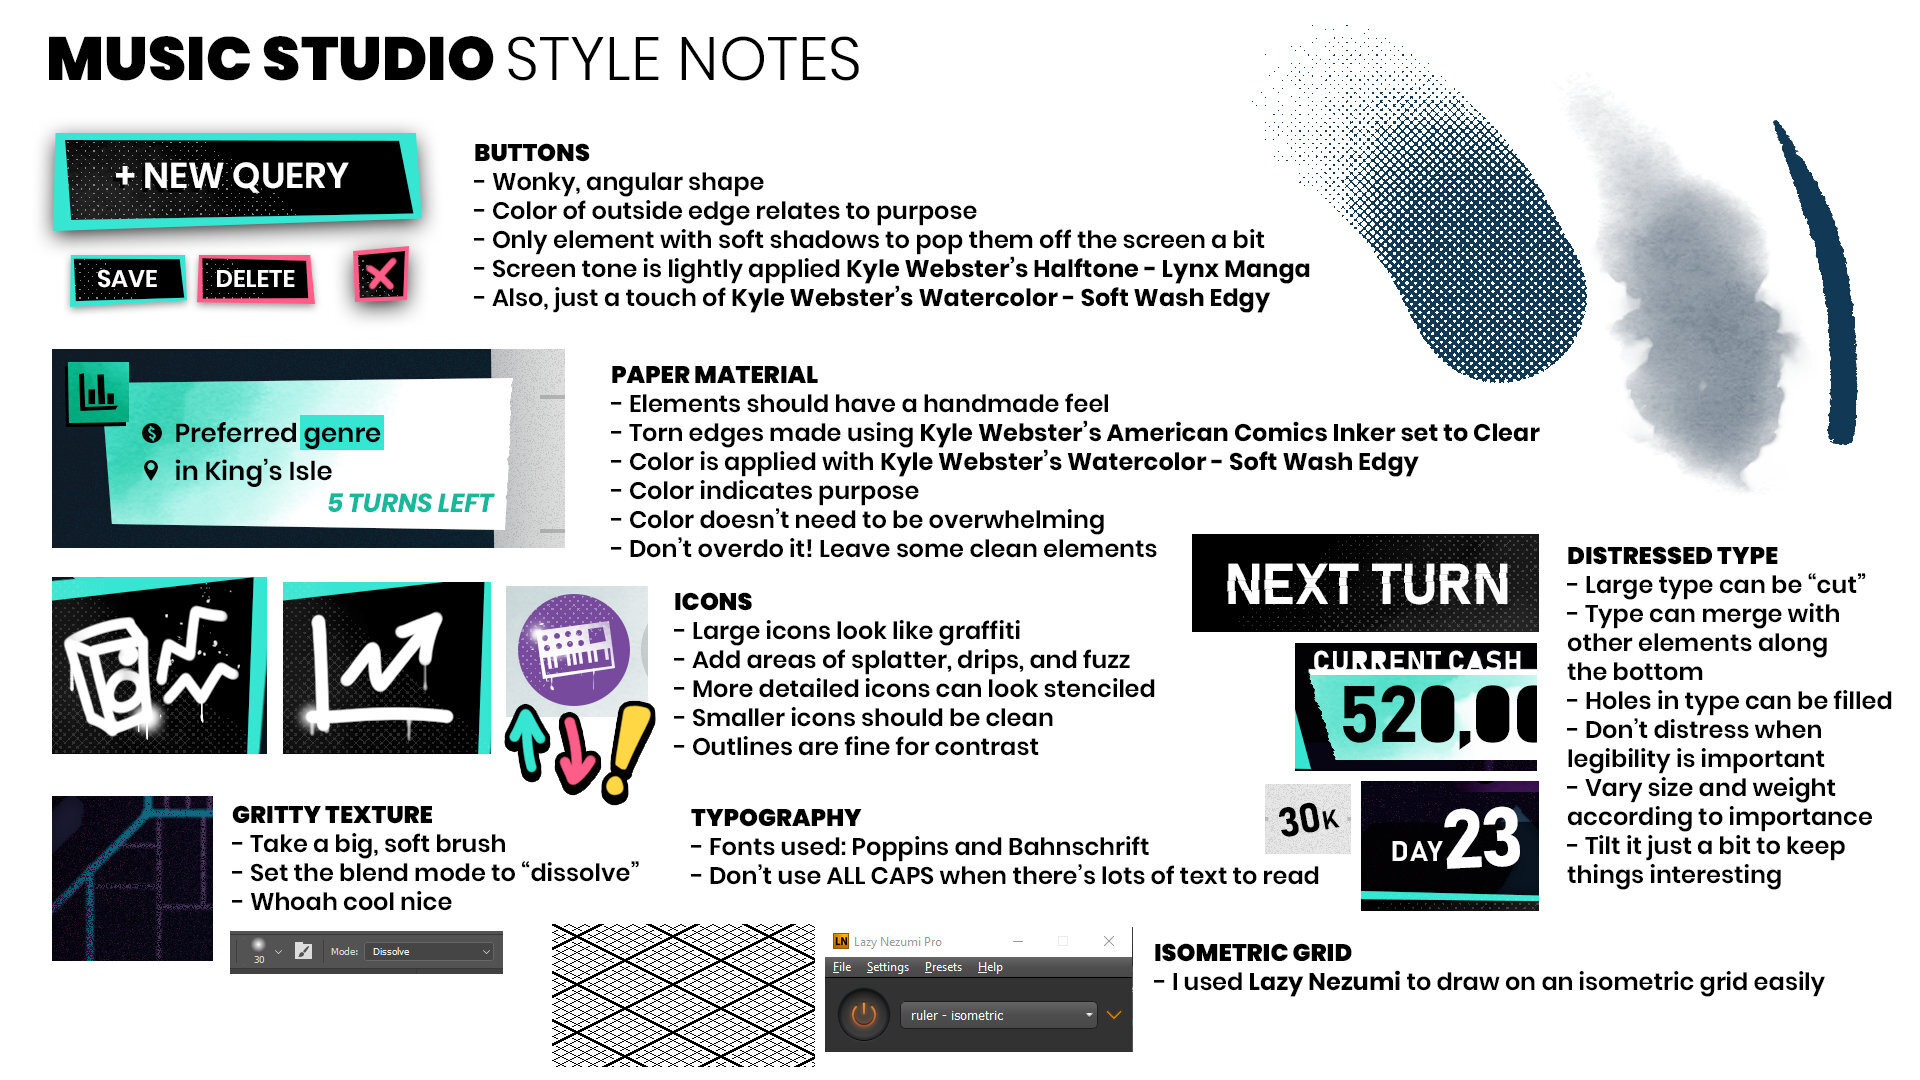 Style notes